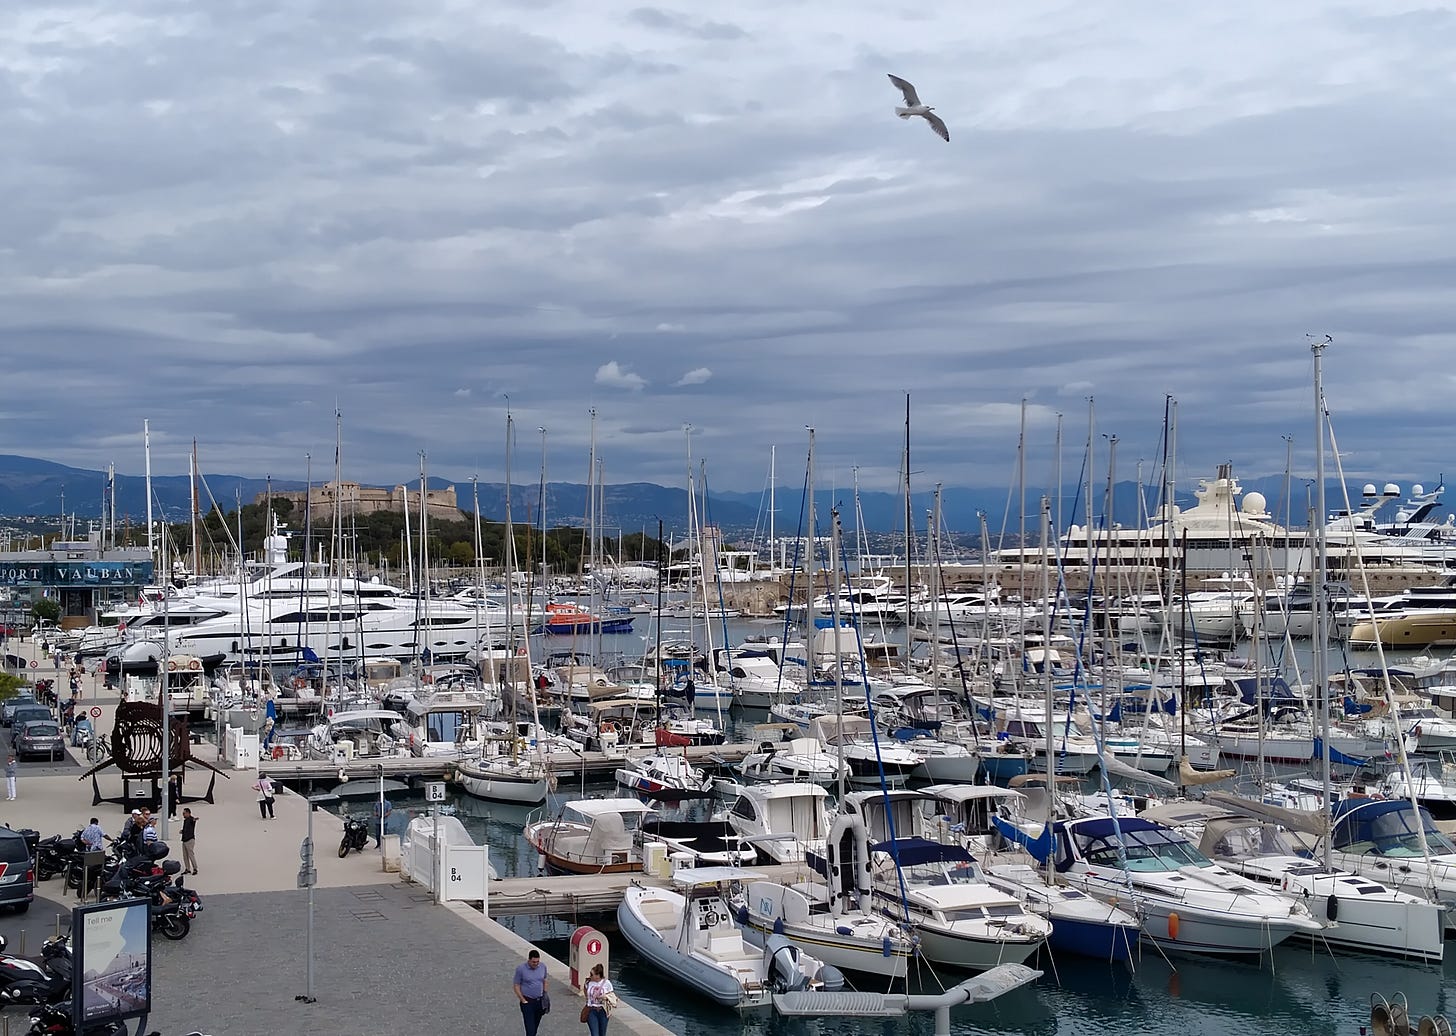 photo of yachts in the harbor at Antibes, France. The day is bright but still cloudy, the moorings are full. In the background some mega yachts and in the far distance an old fort on a hill. 